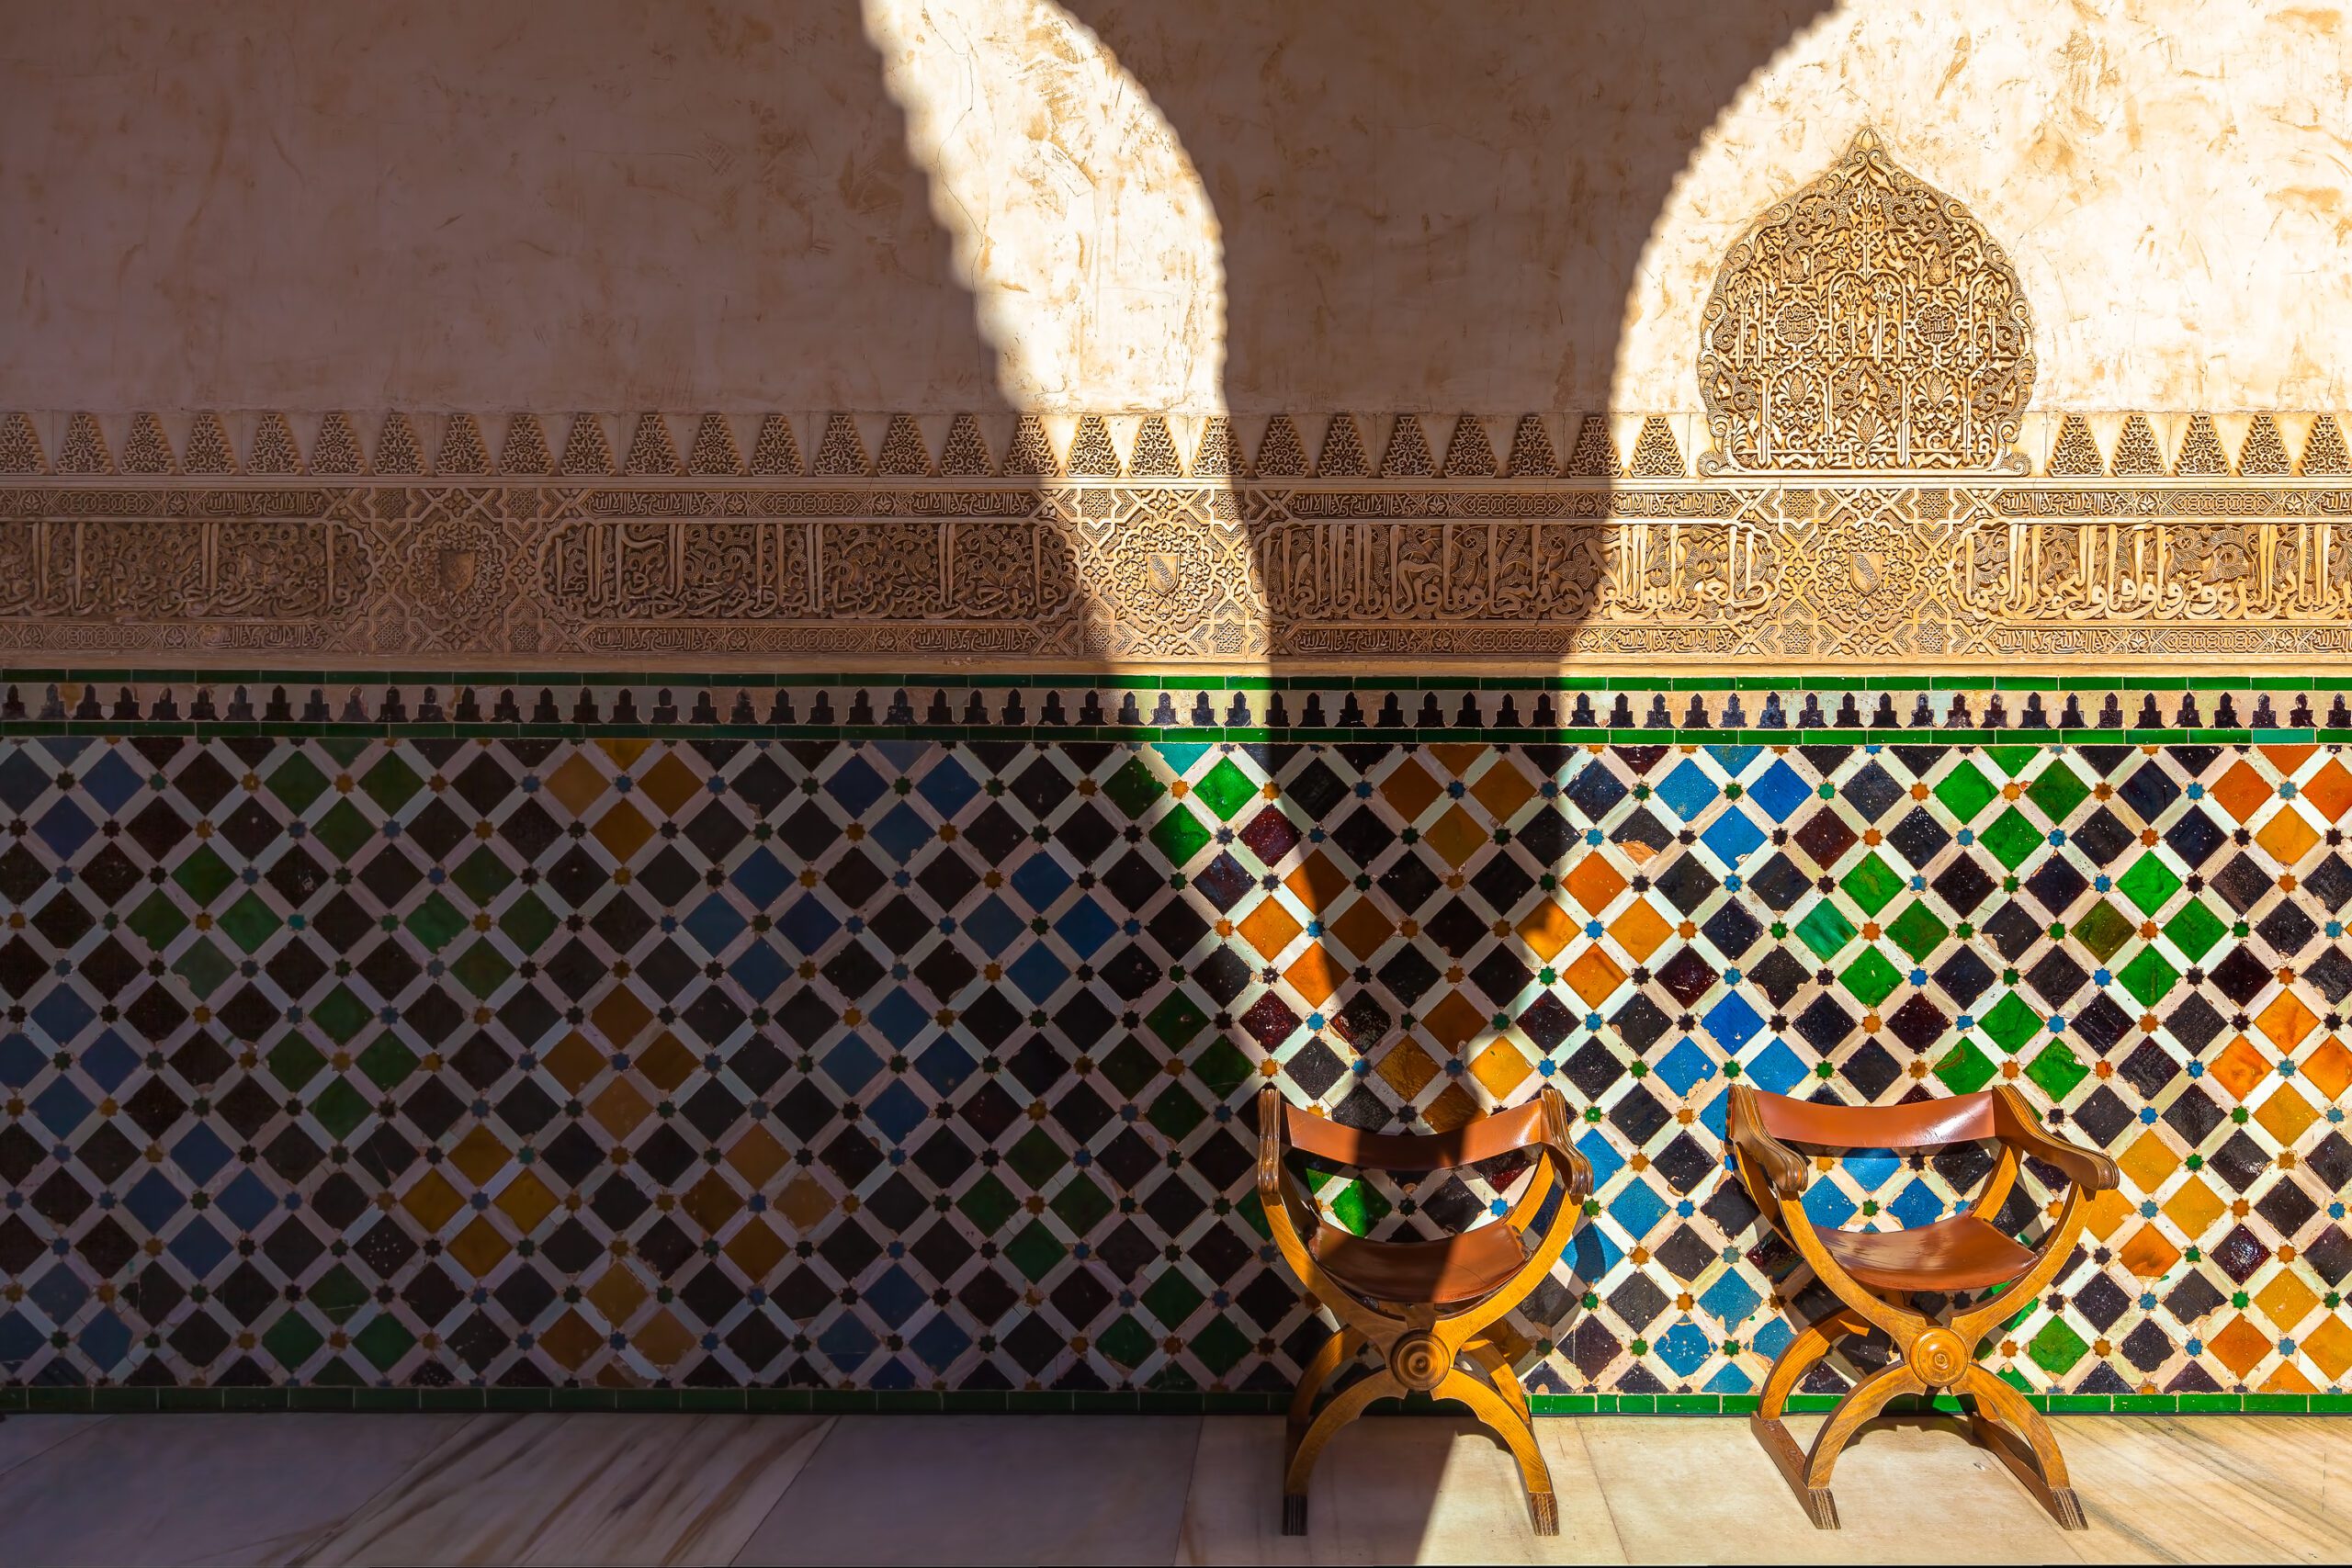 Ornate Alhambra Castle detailing with two wooden chairs in the foreground.